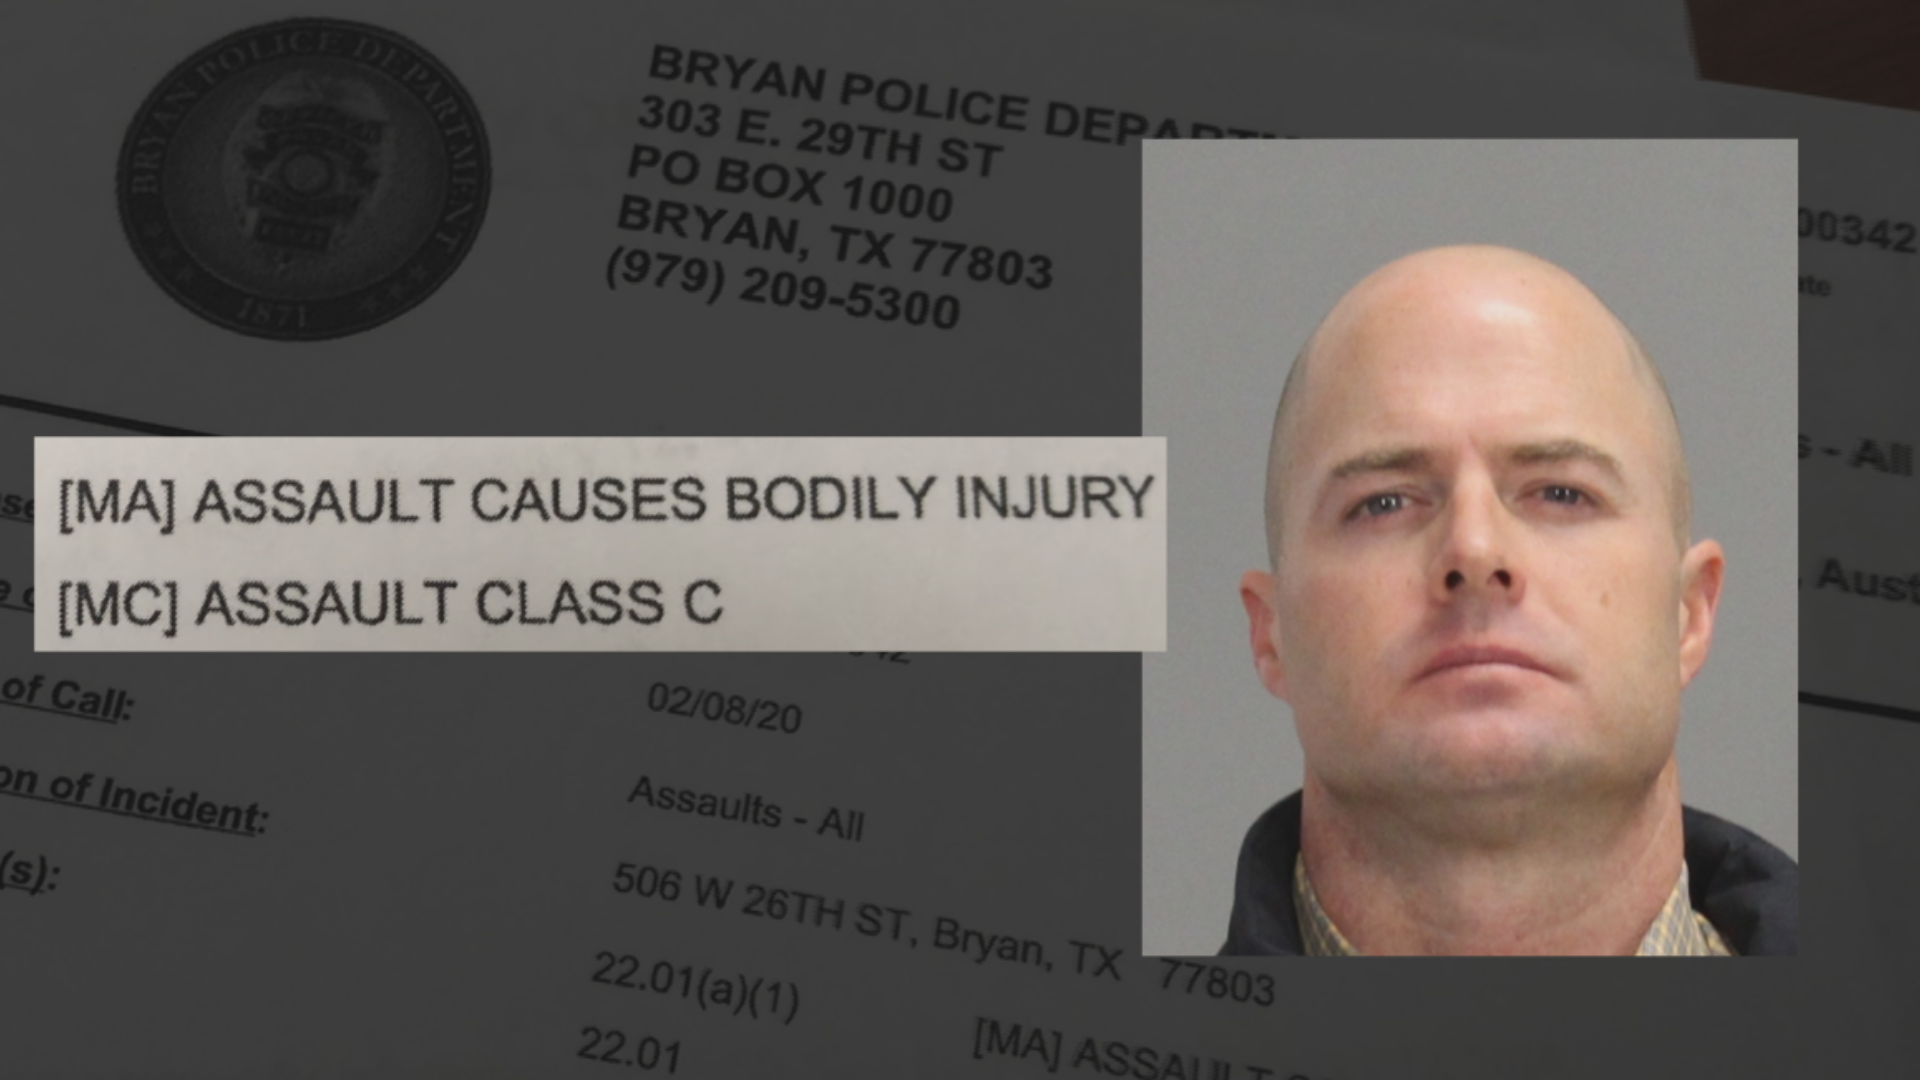 Assistant Chief Rawls is facing one count of assault after a fight broke out at a fundraising event in Bryan on February 8. He was off duty at the time.